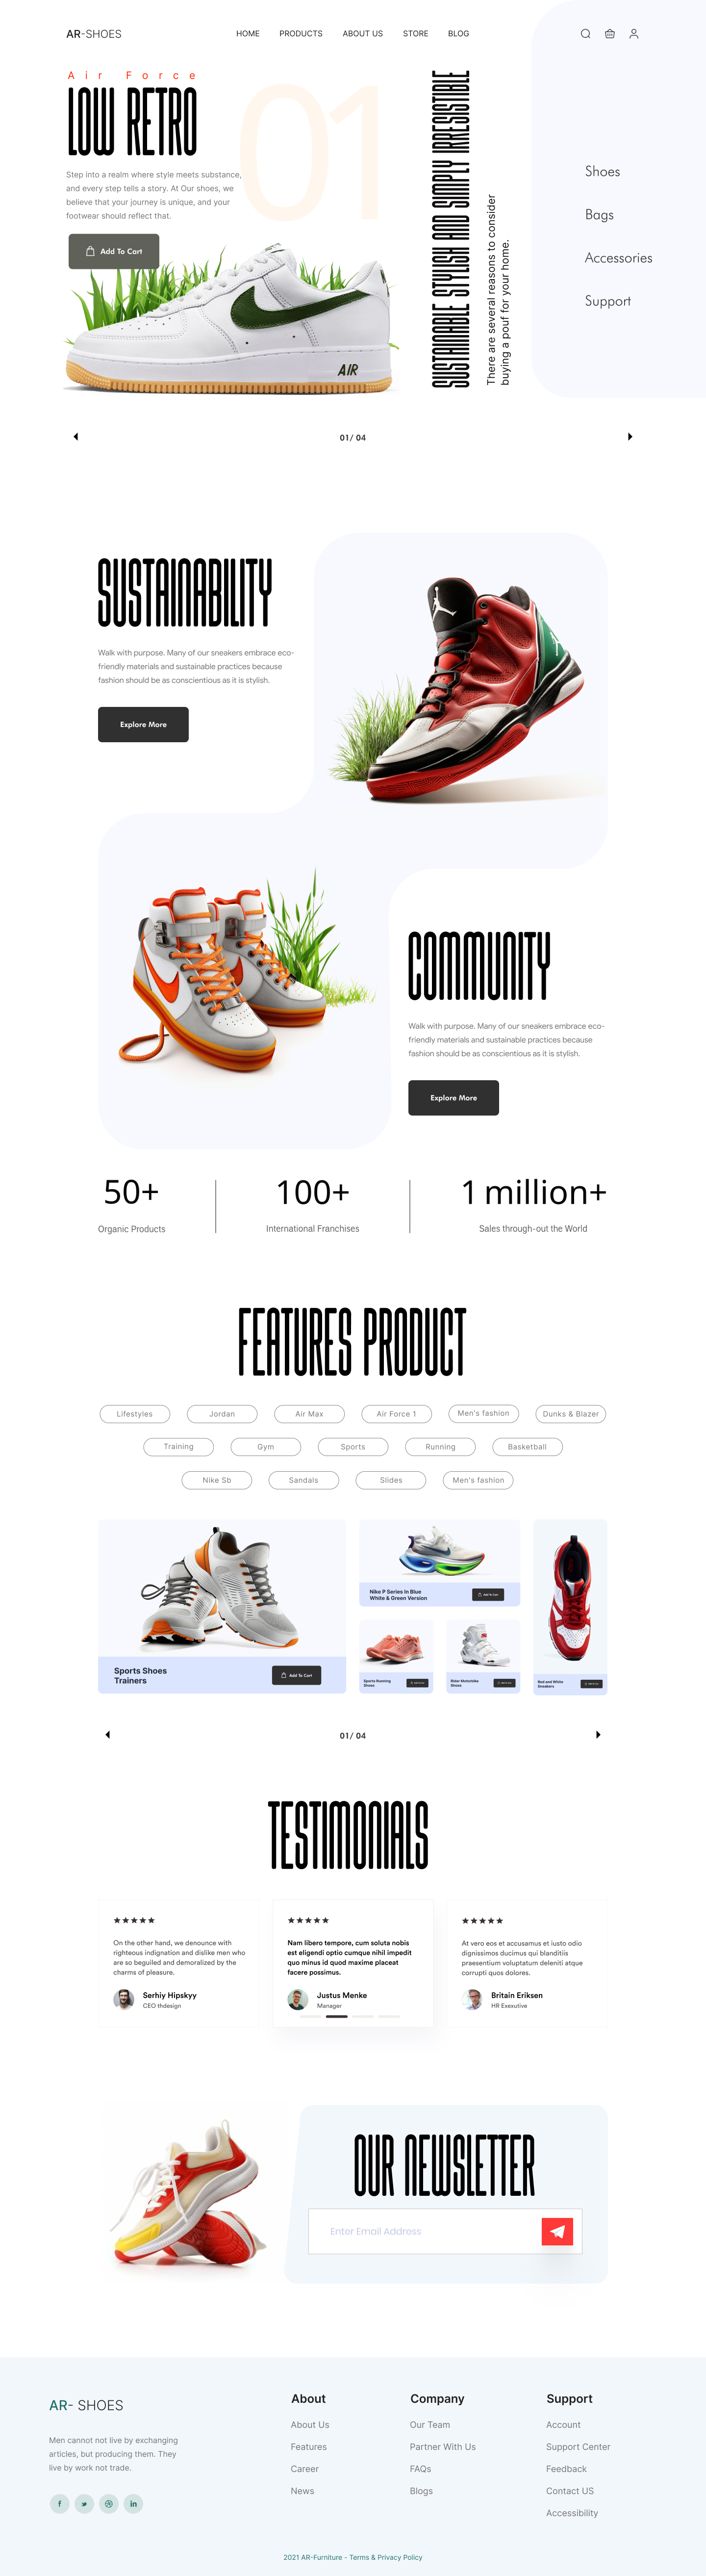 Full Preview of Low Retro - Shopify Website Design for Shoes Company